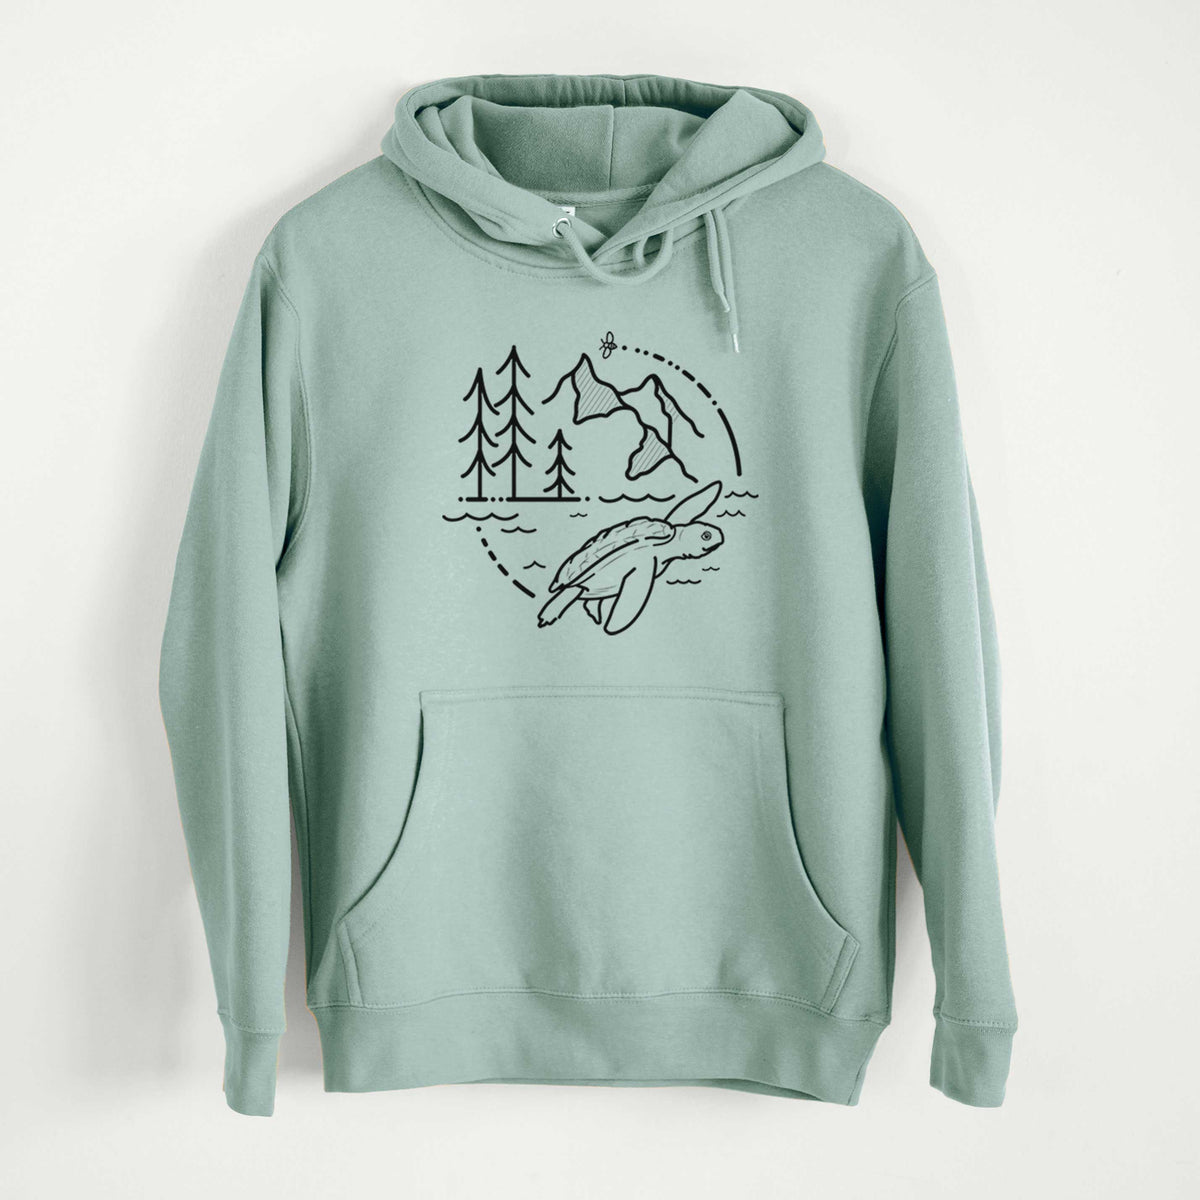 It&#39;s All Connected - Kemps Ridley Turtle  - Mid-Weight Unisex Premium Blend Hoodie